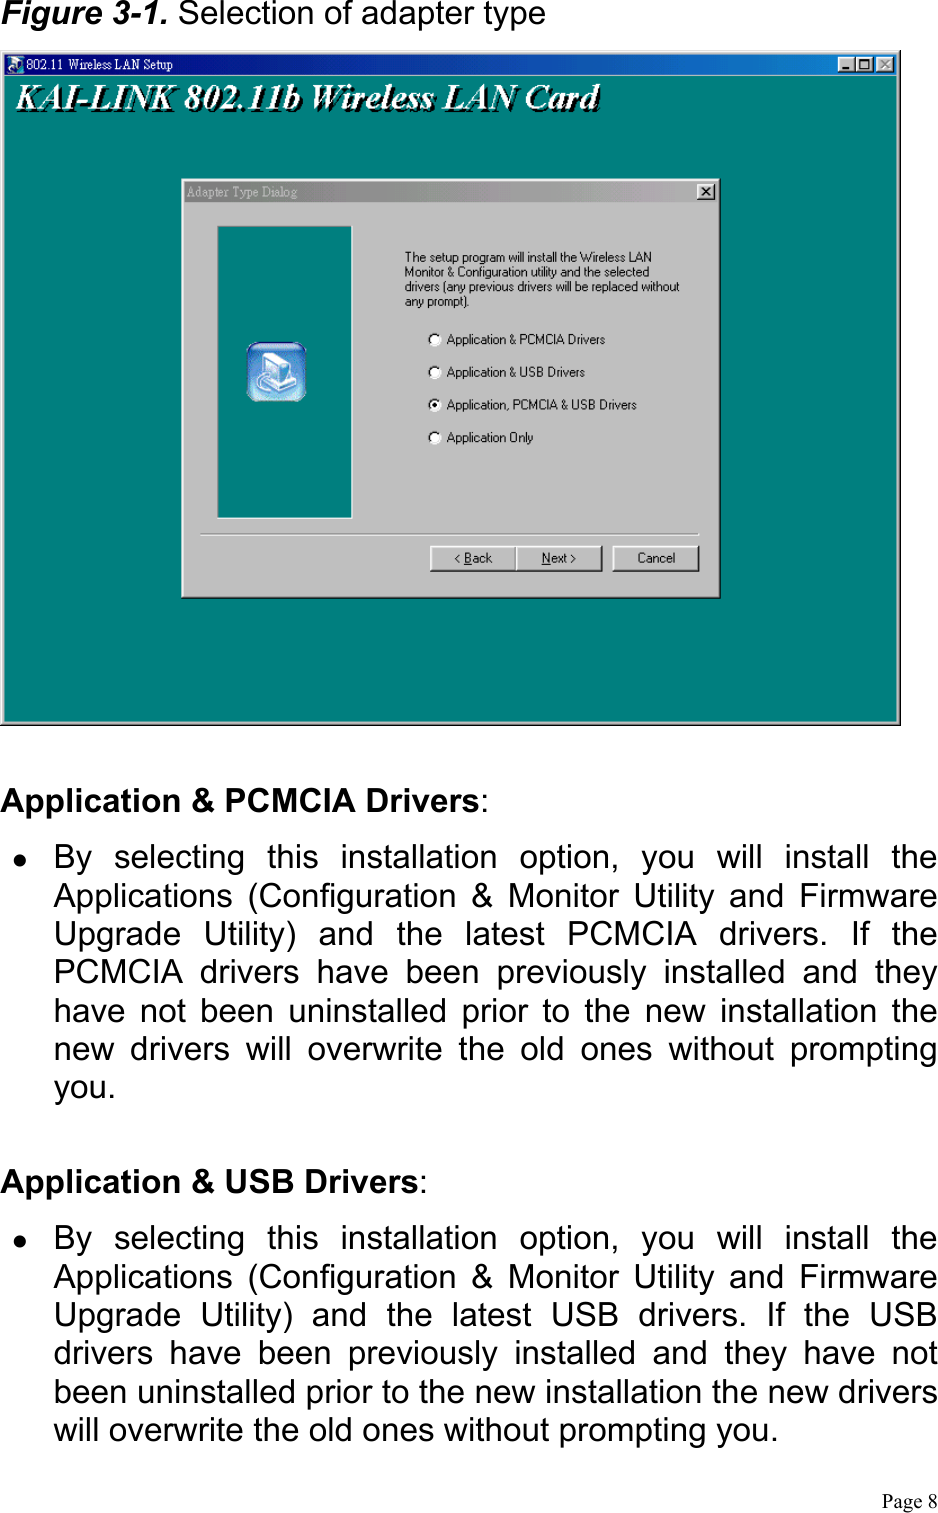  Page 8 Figure 3-1. Selection of adapter type   Application &amp; PCMCIA Drivers:   By selecting this installation option, you will install the Applications (Configuration &amp; Monitor Utility and Firmware Upgrade Utility) and the latest PCMCIA drivers. If the PCMCIA drivers have been previously installed and they have not been uninstalled prior to the new installation the new drivers will overwrite the old ones without prompting you.  Application &amp; USB Drivers:   By selecting this installation option, you will install the Applications (Configuration &amp; Monitor Utility and Firmware Upgrade Utility) and the latest USB drivers. If the USB drivers have been previously installed and they have not been uninstalled prior to the new installation the new drivers will overwrite the old ones without prompting you.  